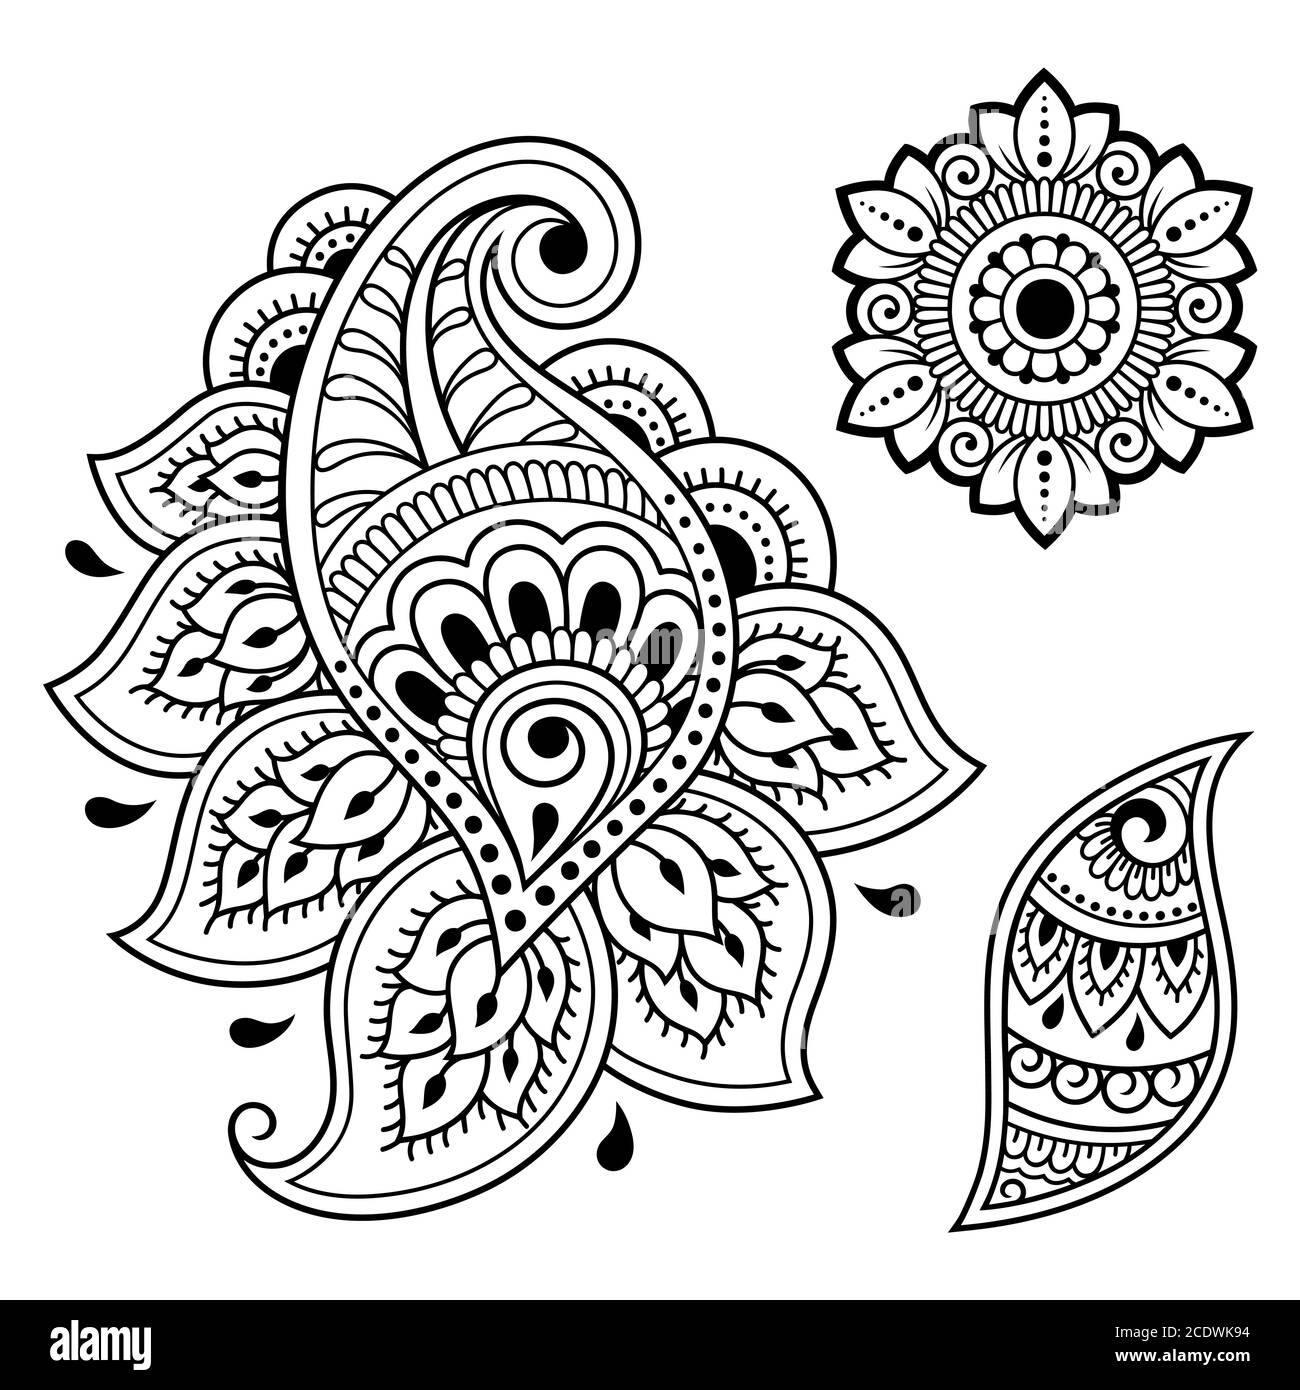 How to Draw Mehndi Design APK pour Android Télécharger